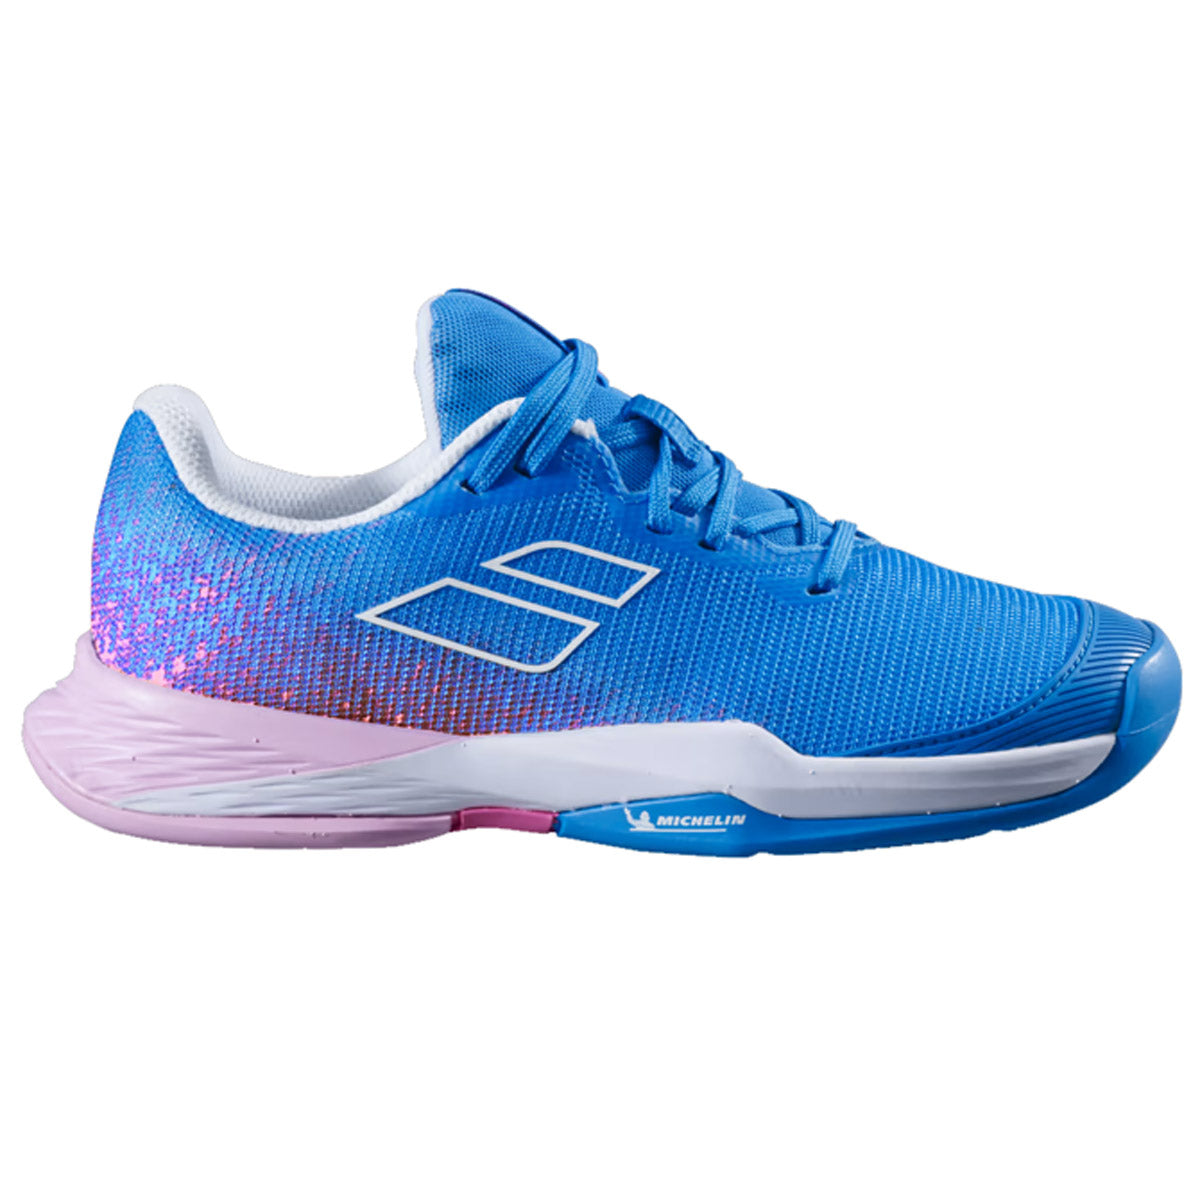 Babolat Jet Mach 3 All Court Tennis Shoes (Girls) - French Blue